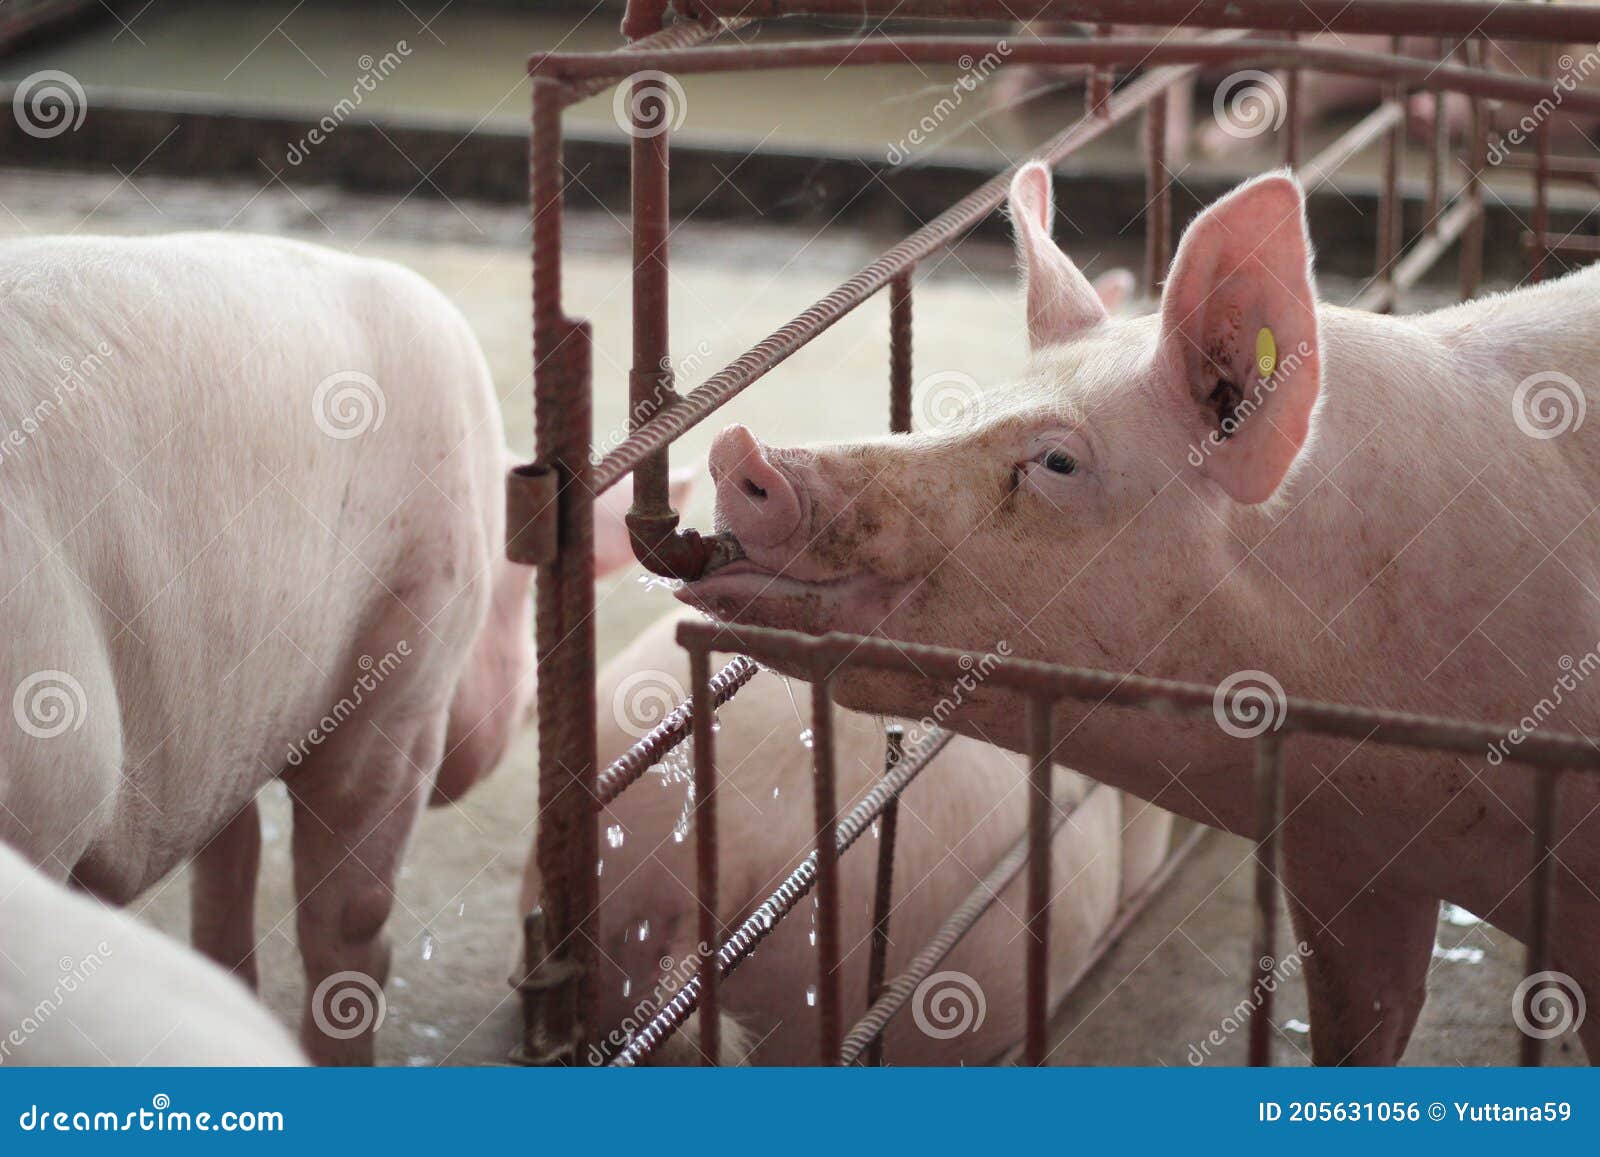 the happy fattening pig in big commercial swine farm